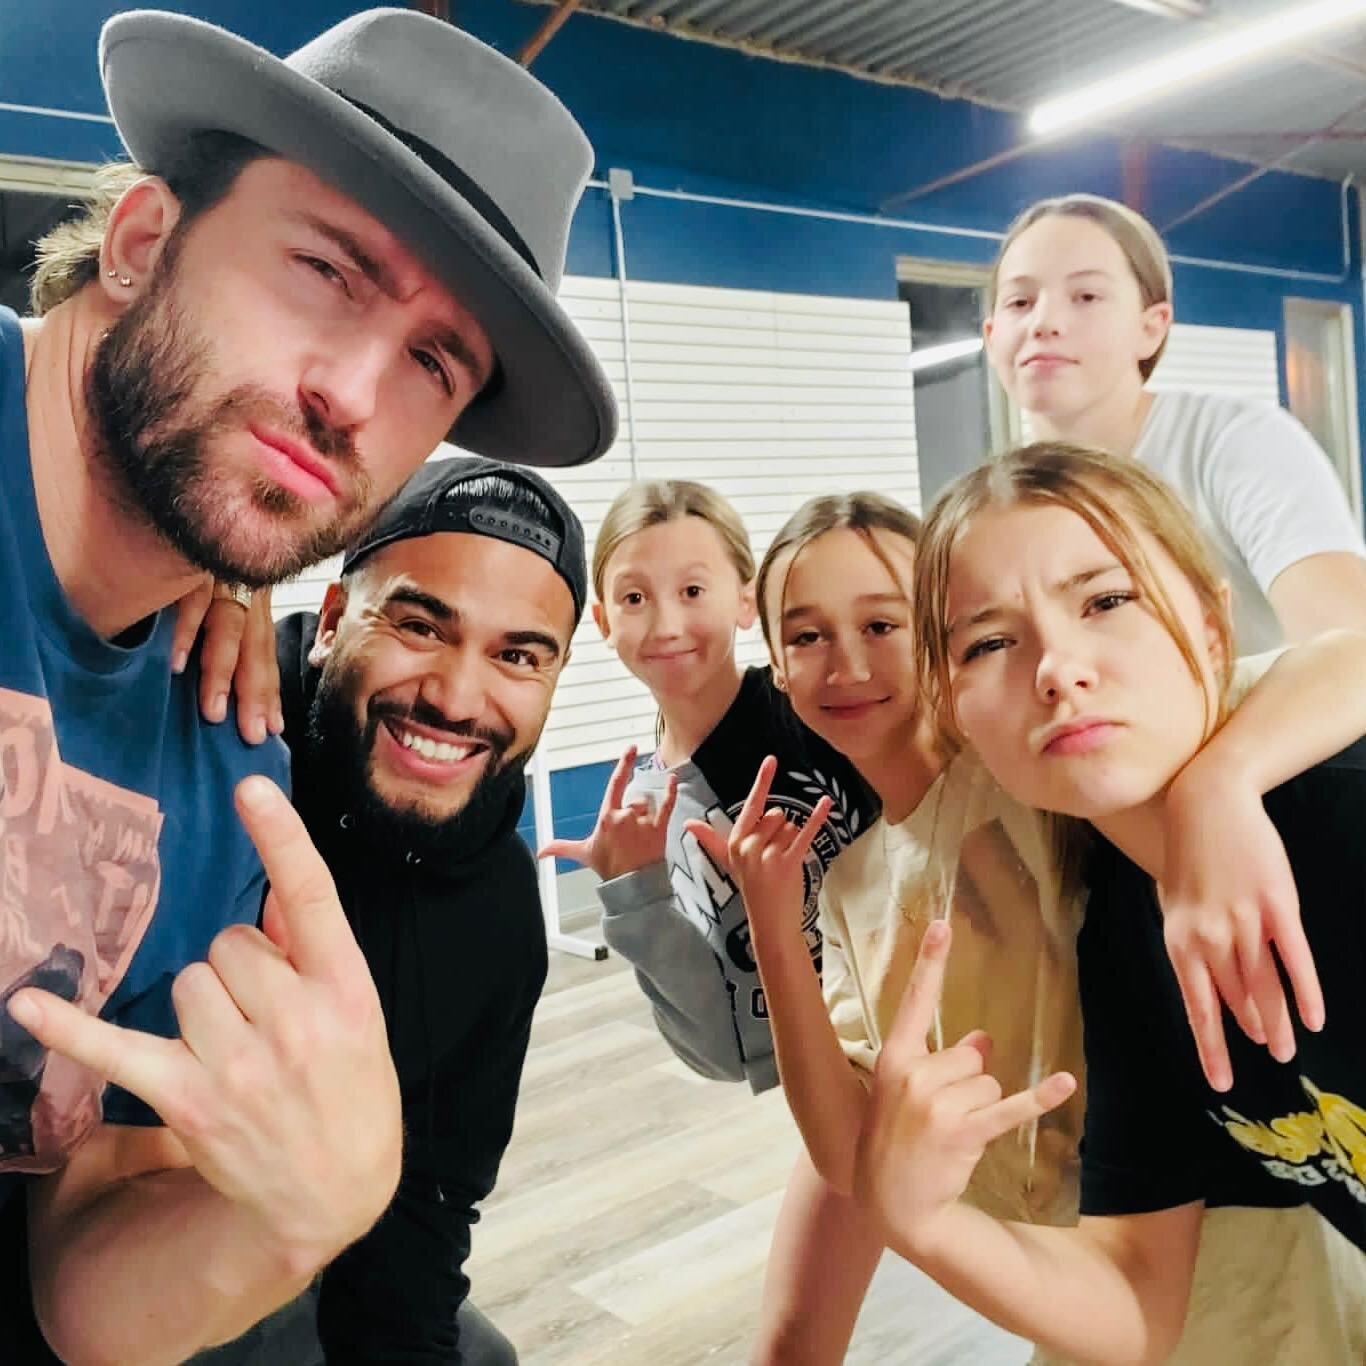 #photodump from a recent @g2entertain trip to @peaceriverab to visit the amazing @burnsies.sec 💙

We always have an incredible time meeting &amp; connecting with dancers from across Canada - sharing our love + respect for #streetdance 

DM @g2entert